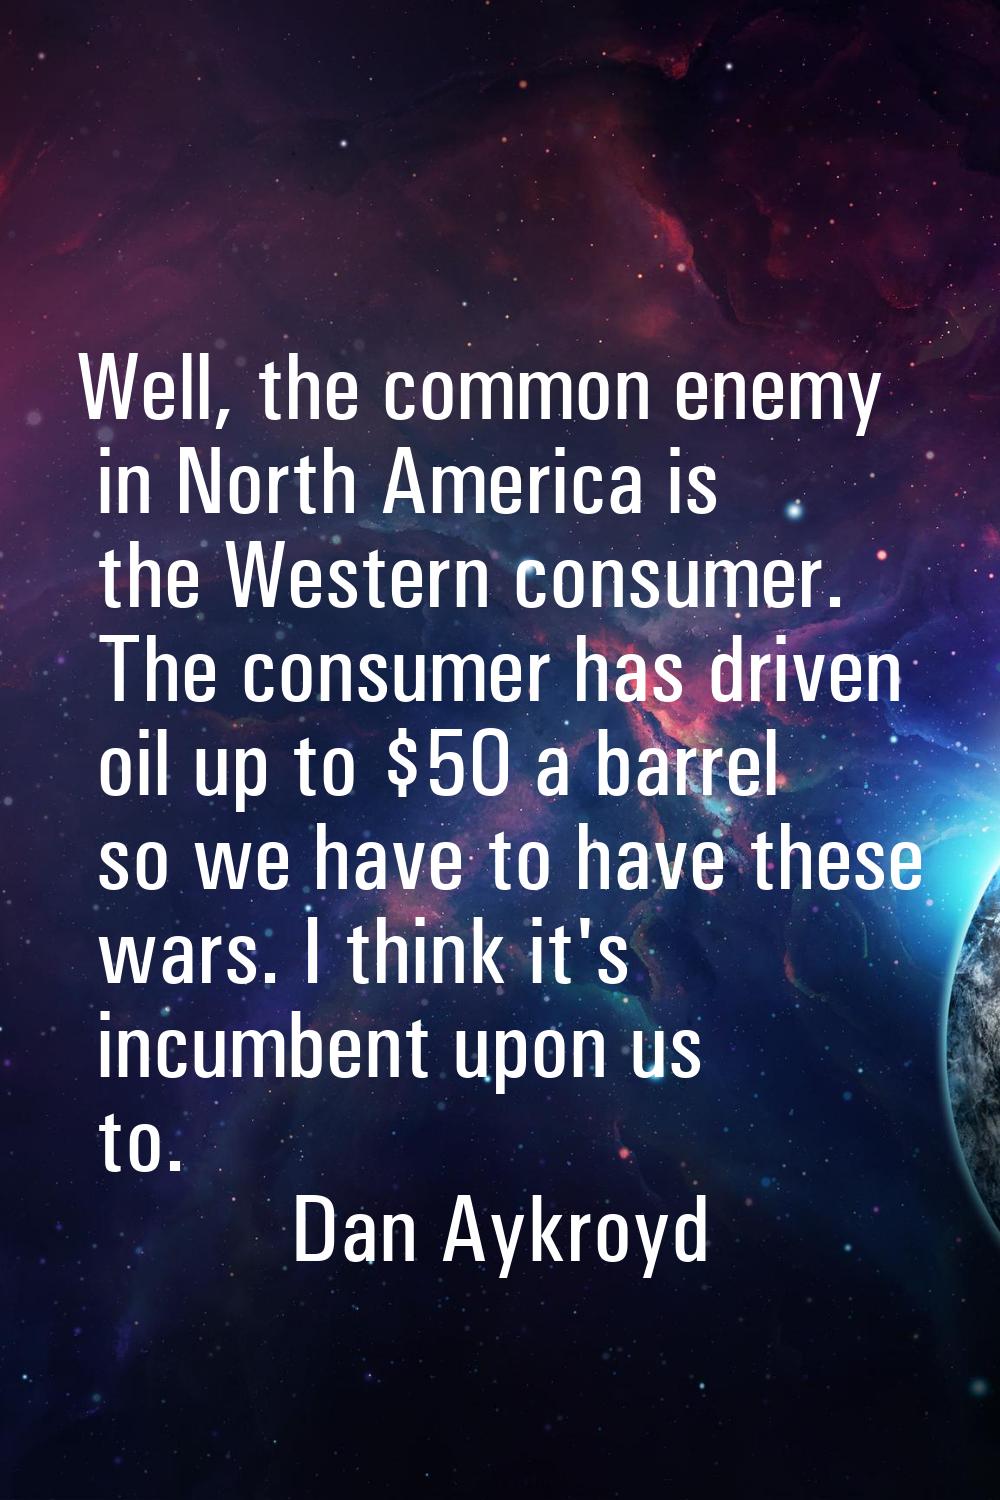 Well, the common enemy in North America is the Western consumer. The consumer has driven oil up to 